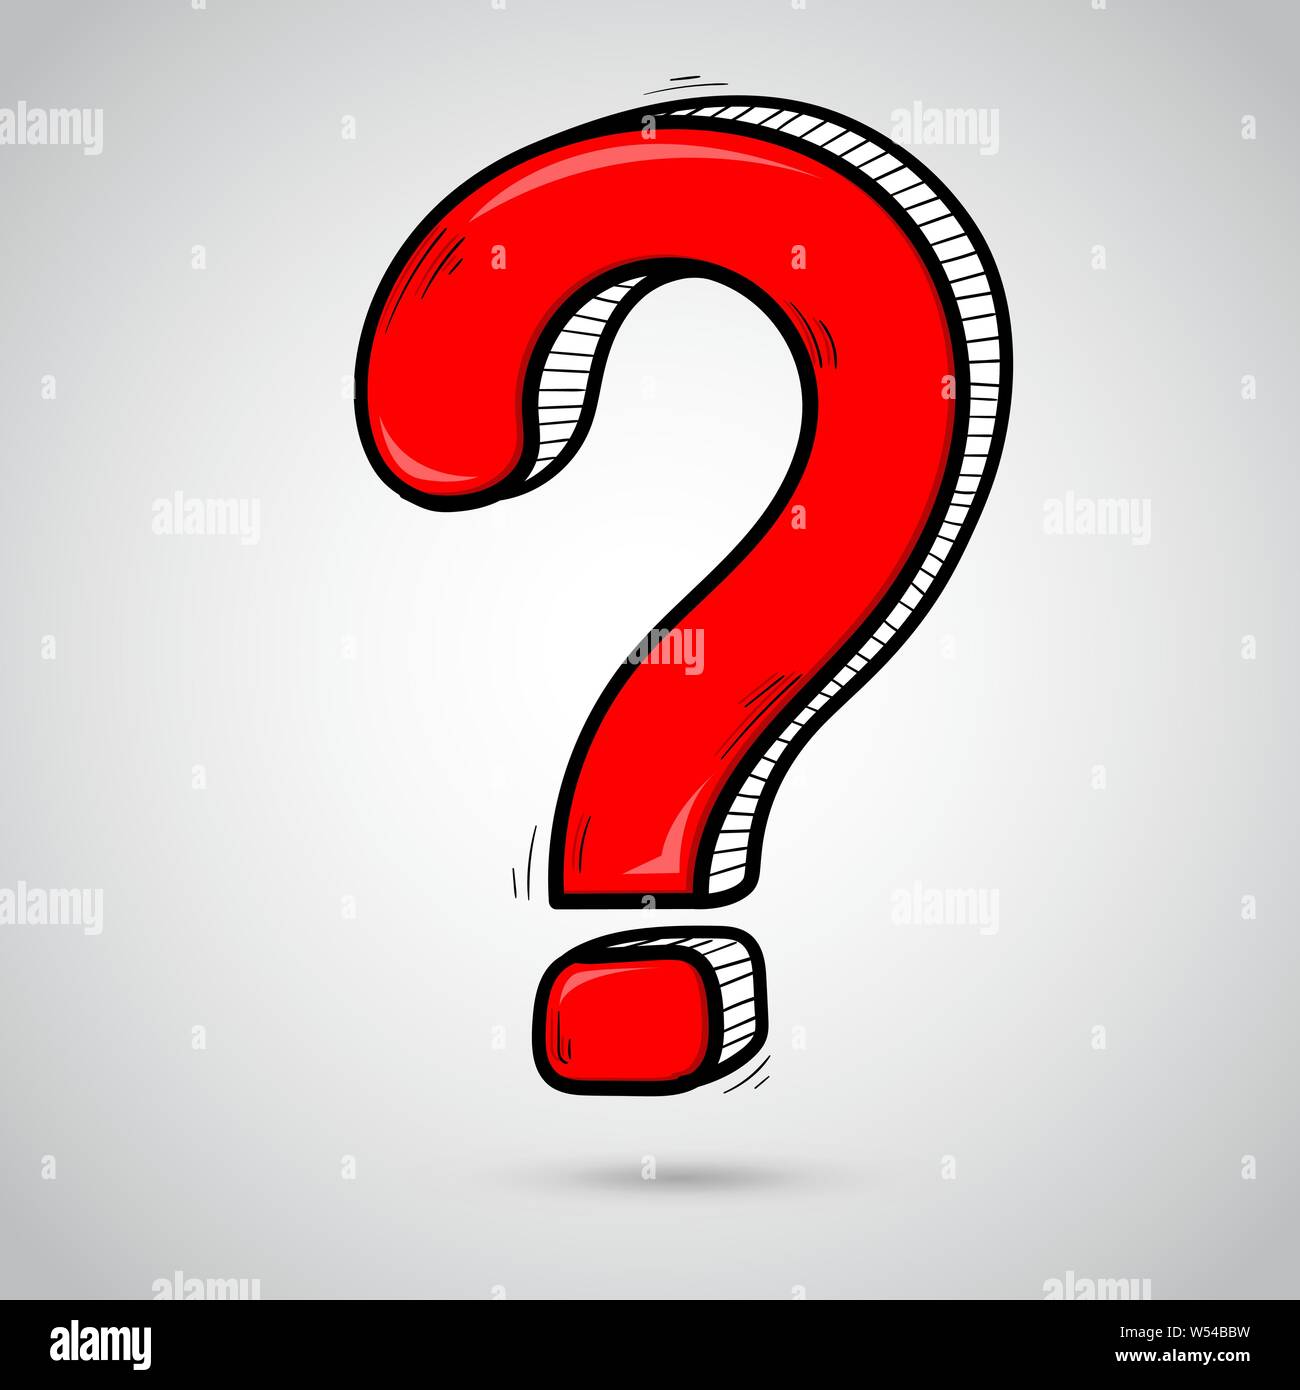 Red question mark. Hand drawn doodle on gray background Stock Vector